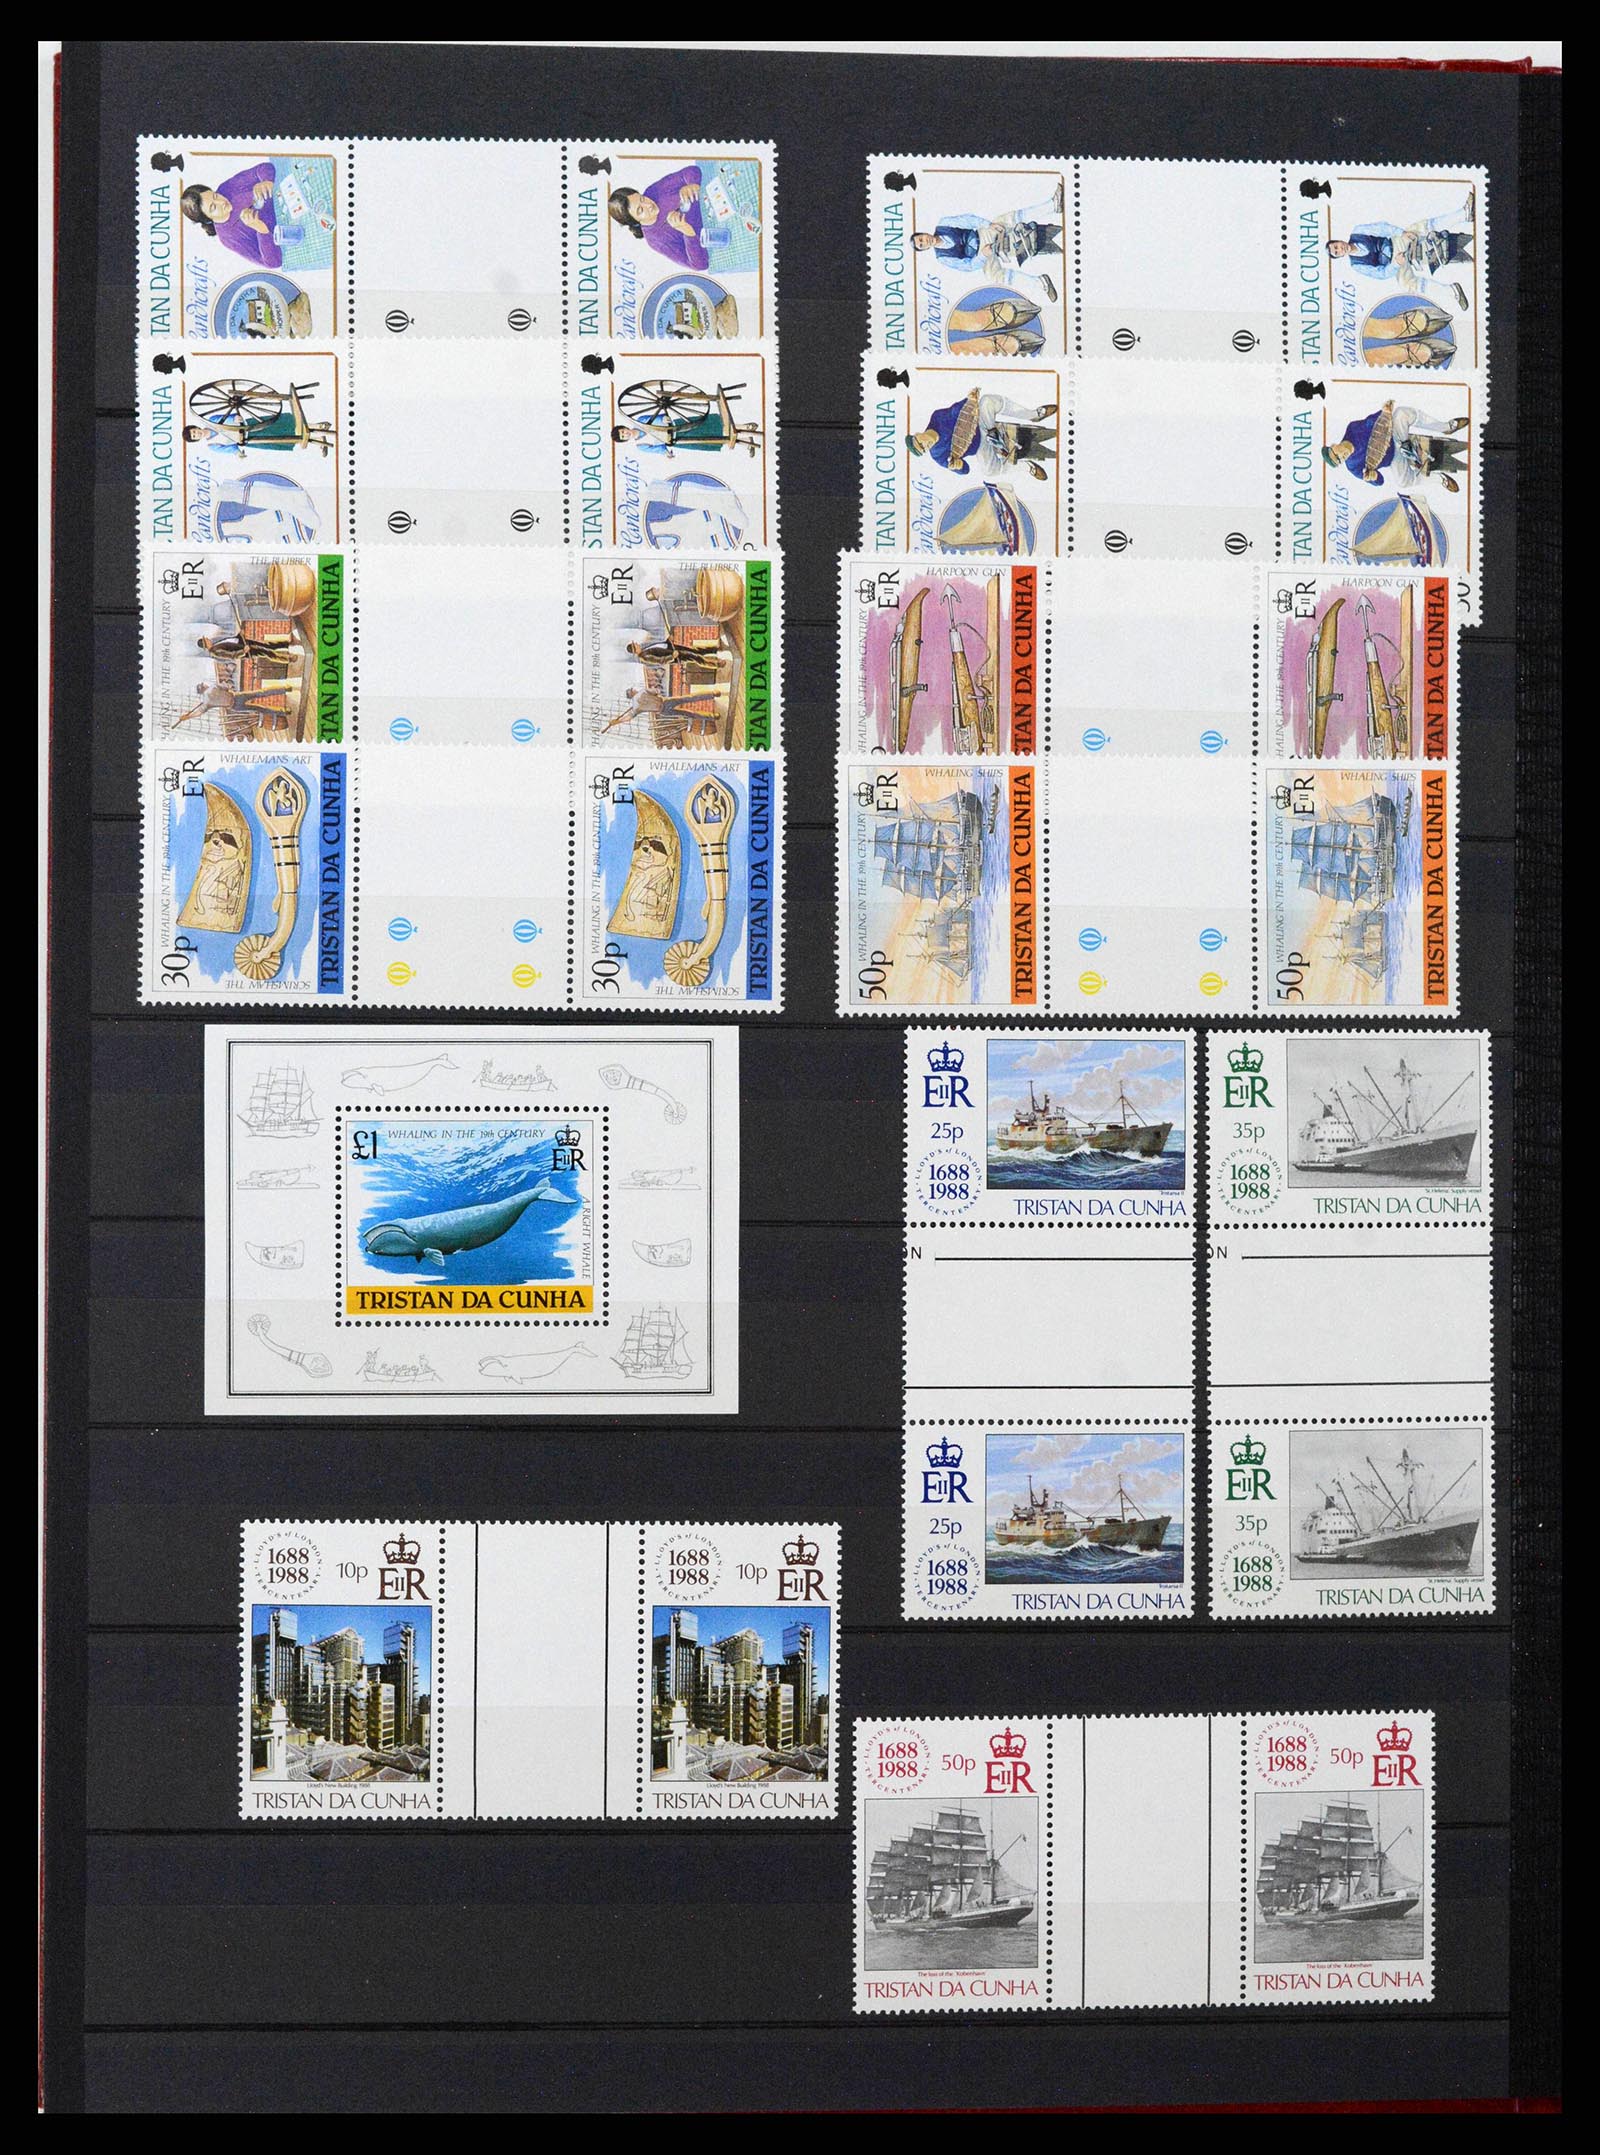 38746 0070 - Stamp collection 38746 British colonies 1980s-1990s.